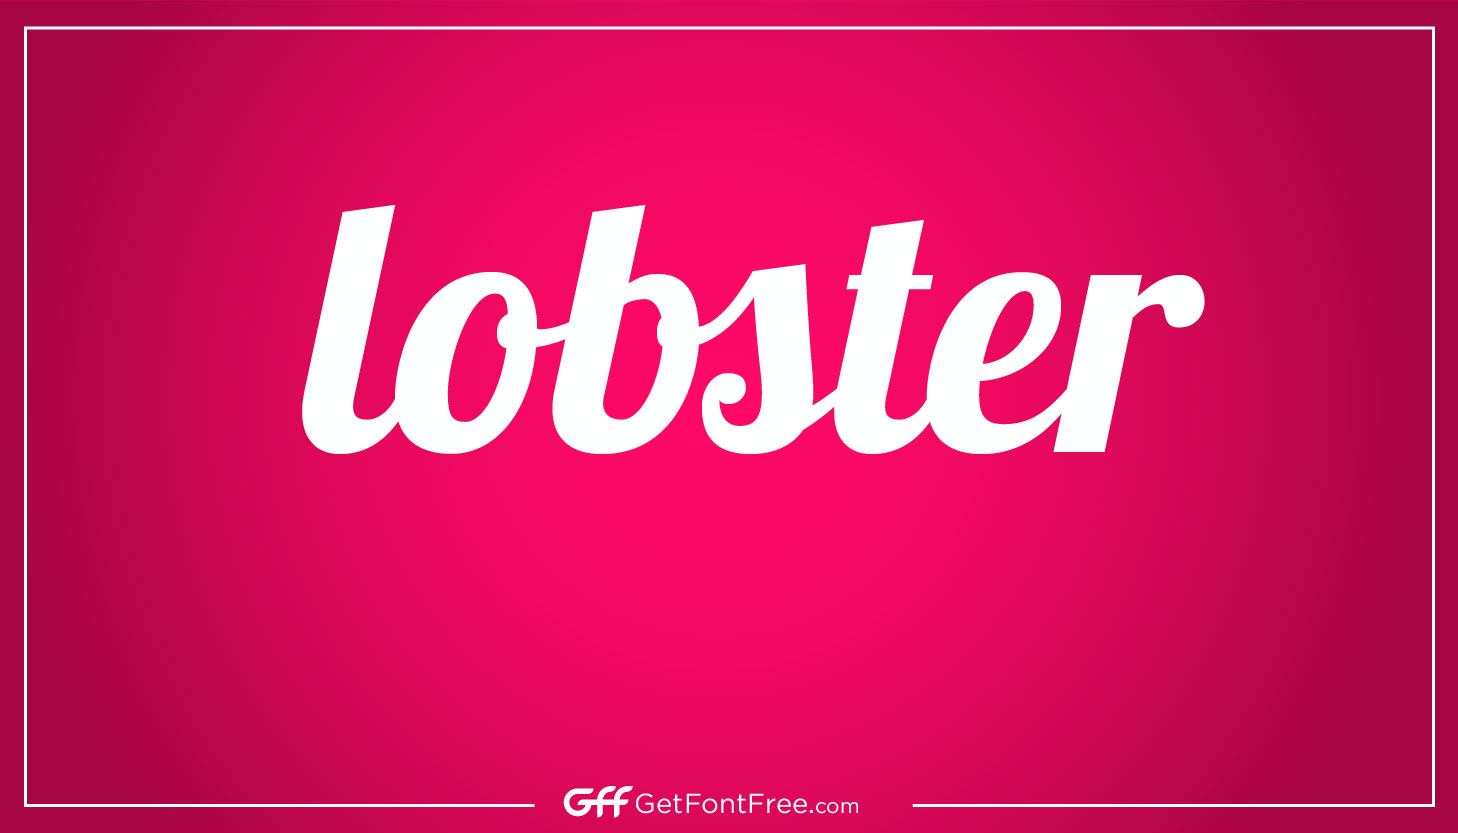 Lobster Font is a decorative script typeface designed by Pablo Impallari in 2010. The font was created with the intention of providing a unique and stylish script that could be used for various purposes such as logos, headings, and quotes. Lobster Font is a casual, fun, and playful typeface inspired by old-school scripts and hand-lettering.